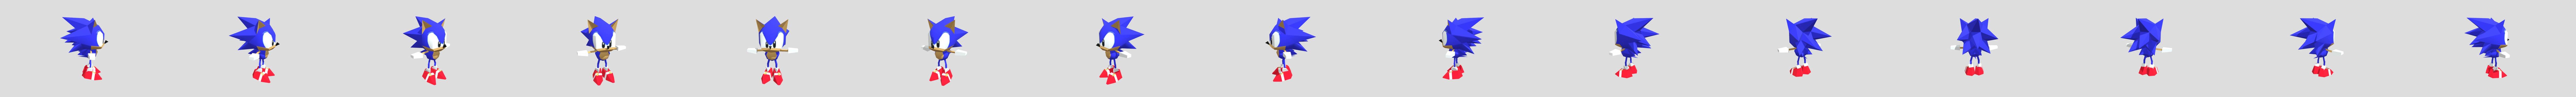 Sonic Majin Sonic R style - Download Free 3D model by MatiasH290 [fc0a120]  - Sketchfab